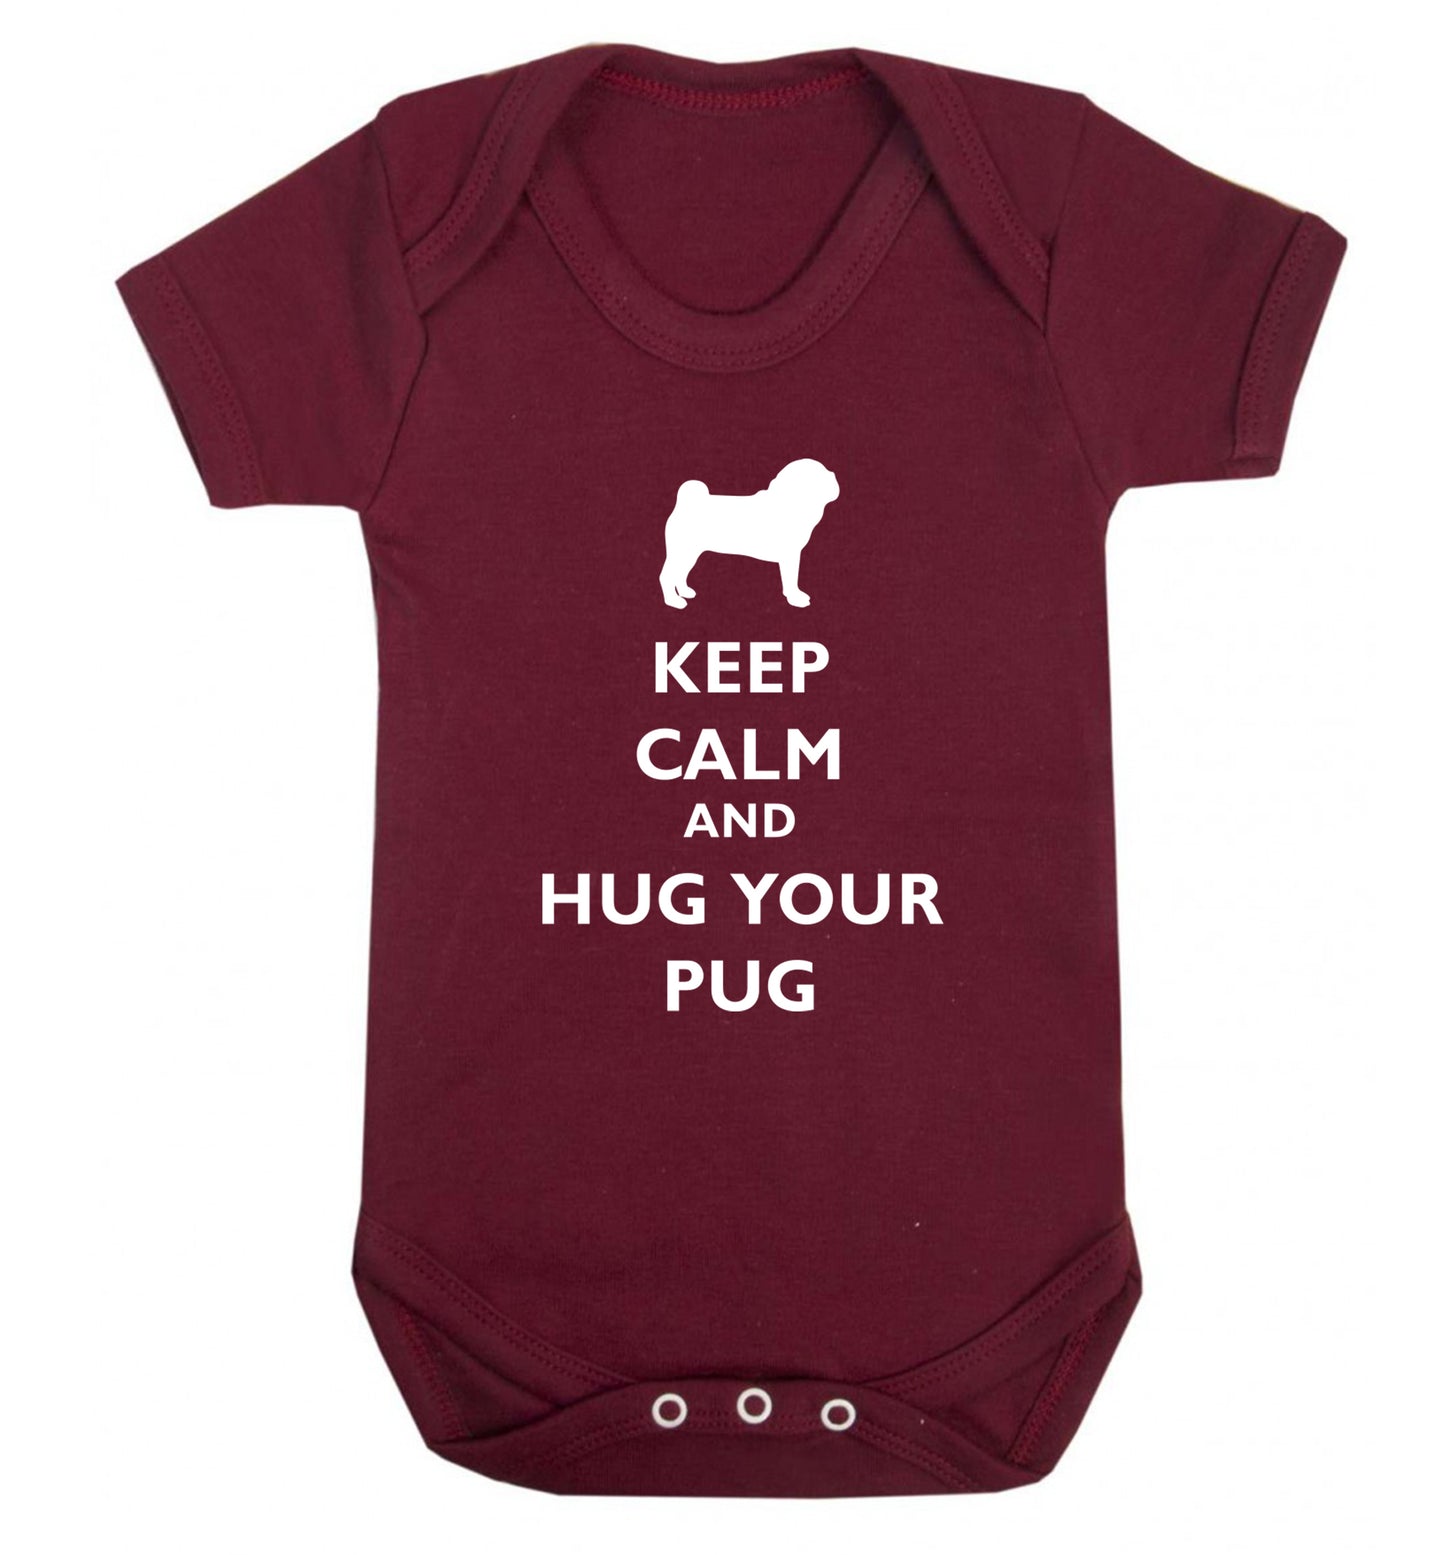 Keep calm and hug your pug Baby Vest maroon 18-24 months